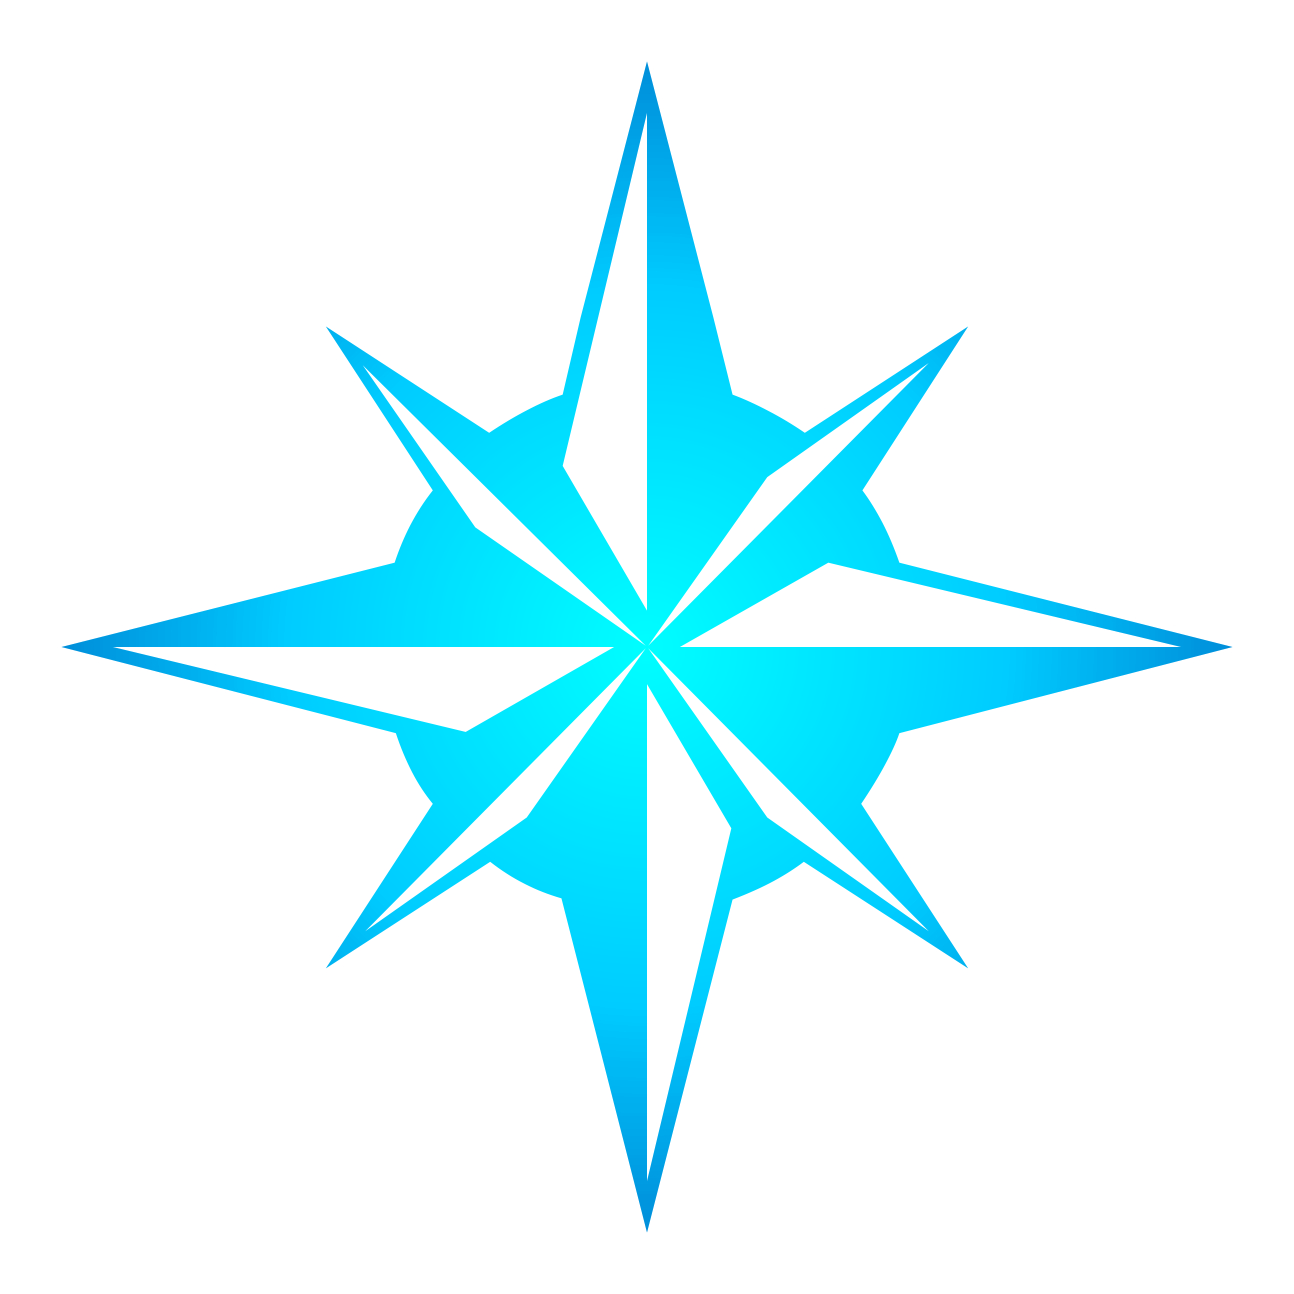 compass rose clipart free - photo #28